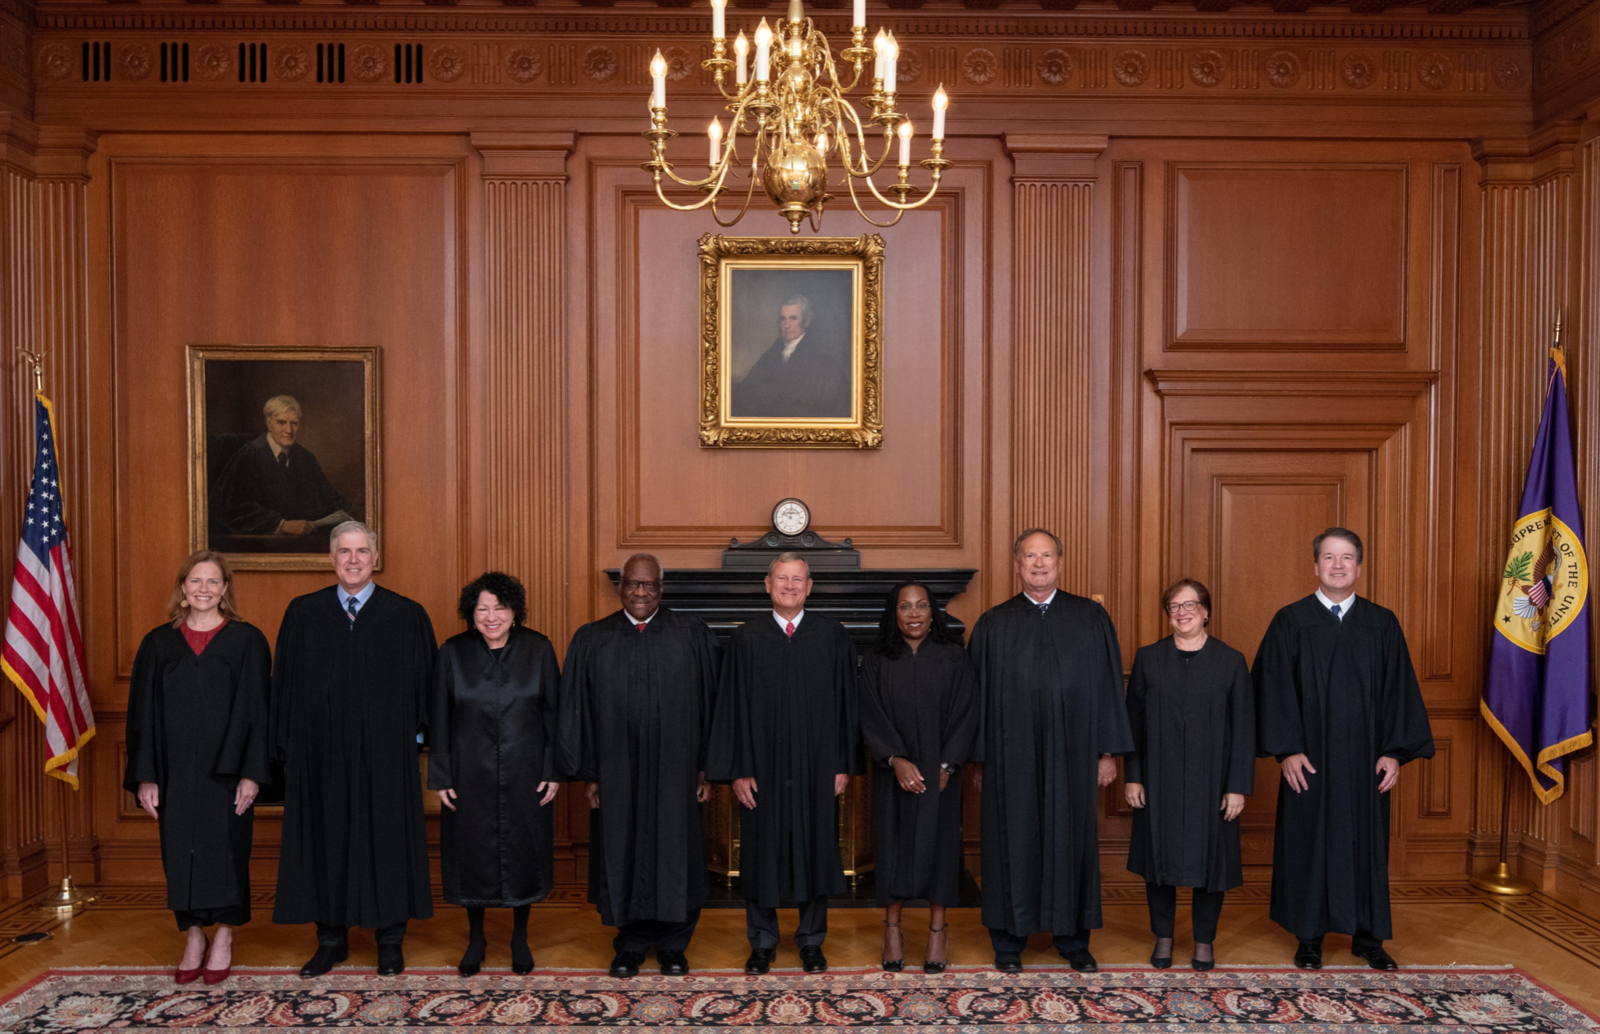 Members of the Supreme Court in the Justices’ Conference Room in 2022.